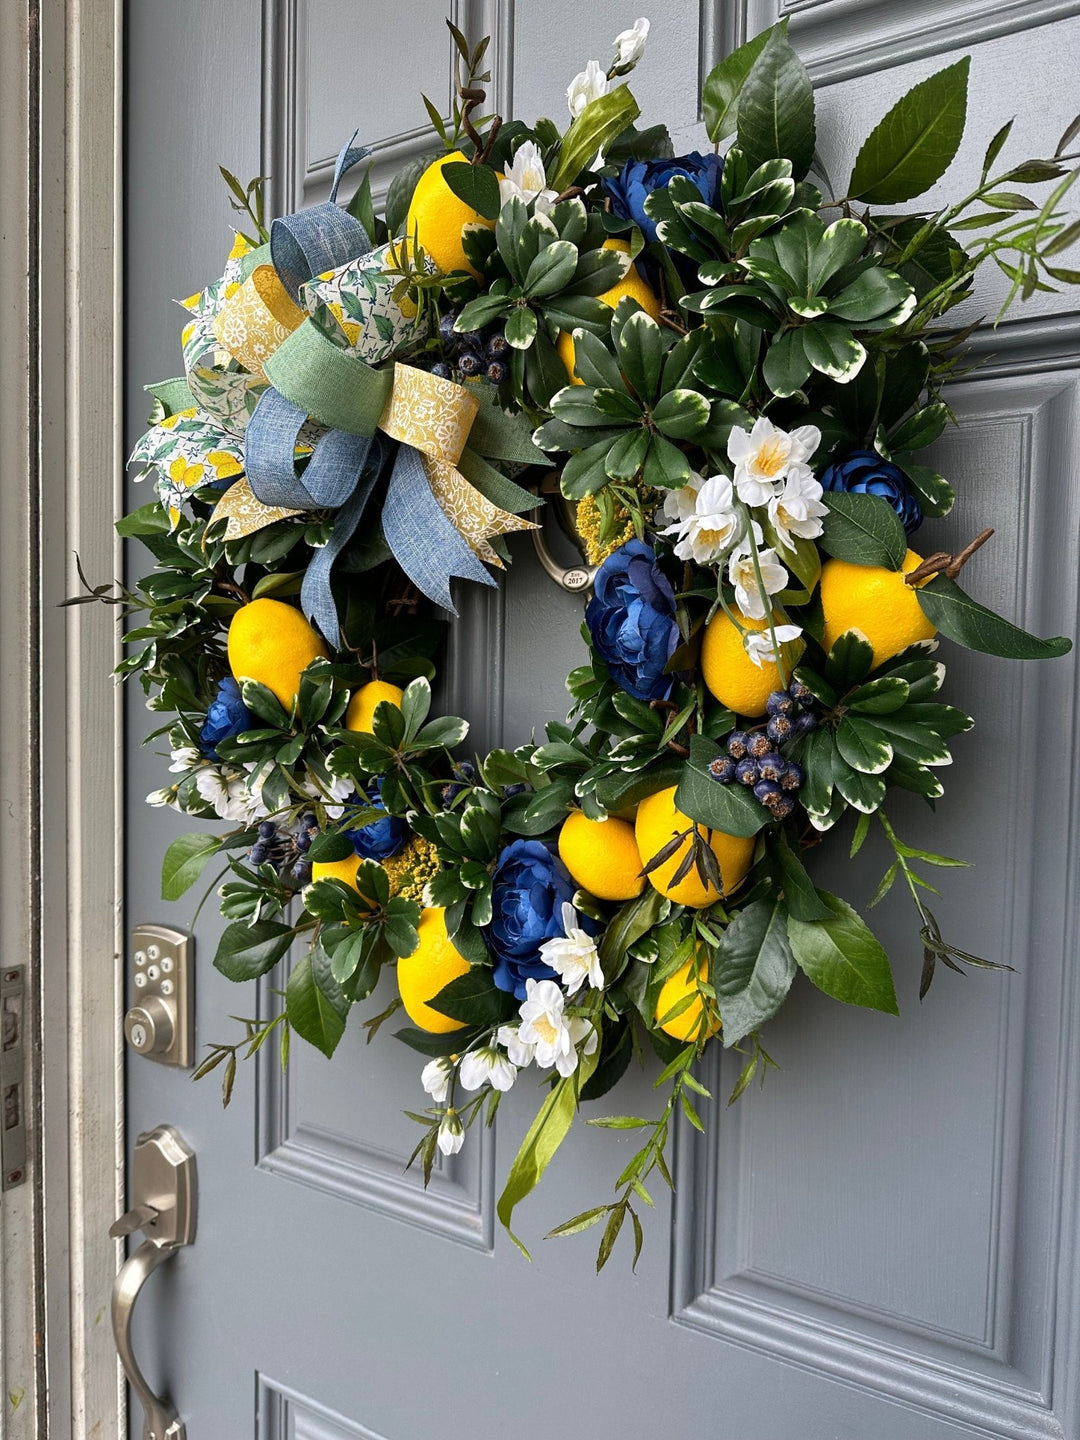 Summer lemon and blueberry wreath for front door